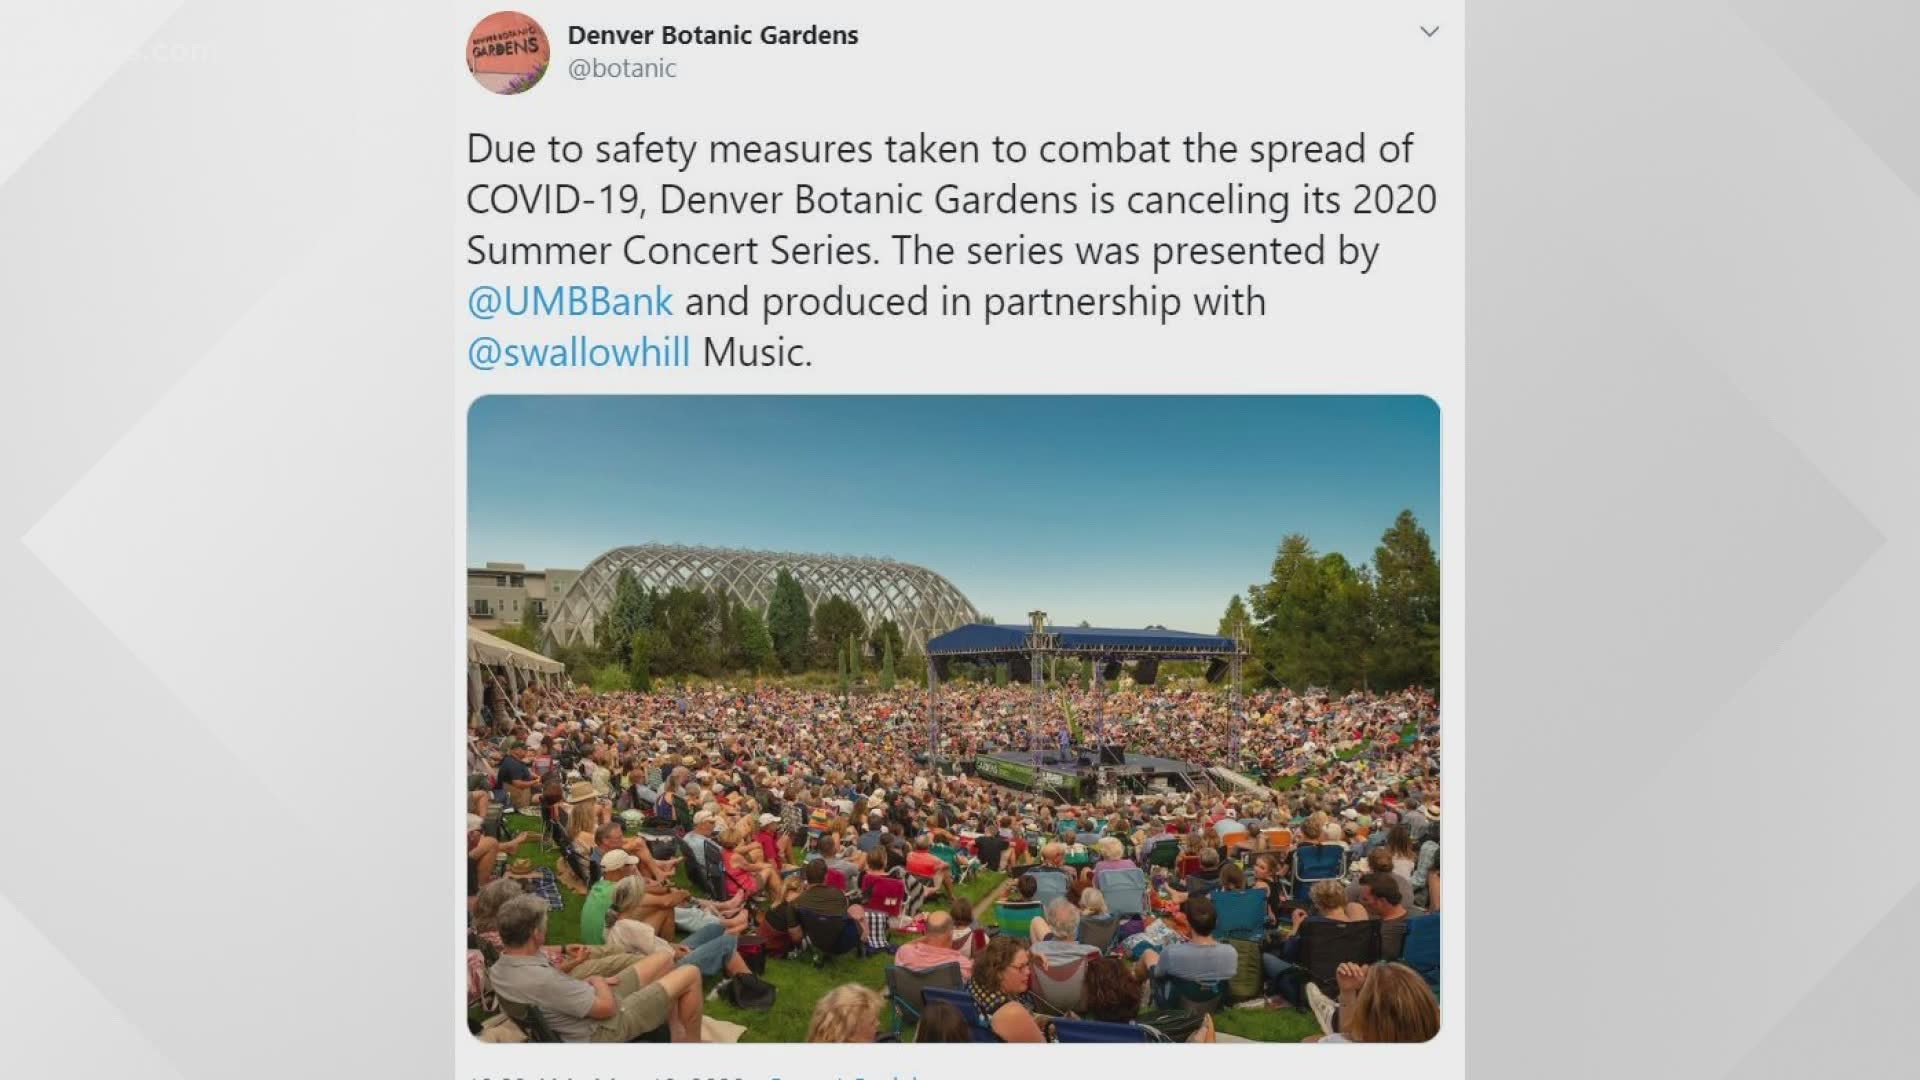 Randy Newman, DeVotchKa, Chris Botti and more were scheduled to perform at Denver Botanic Gardens UMB Bank Amphitheater in 2020.